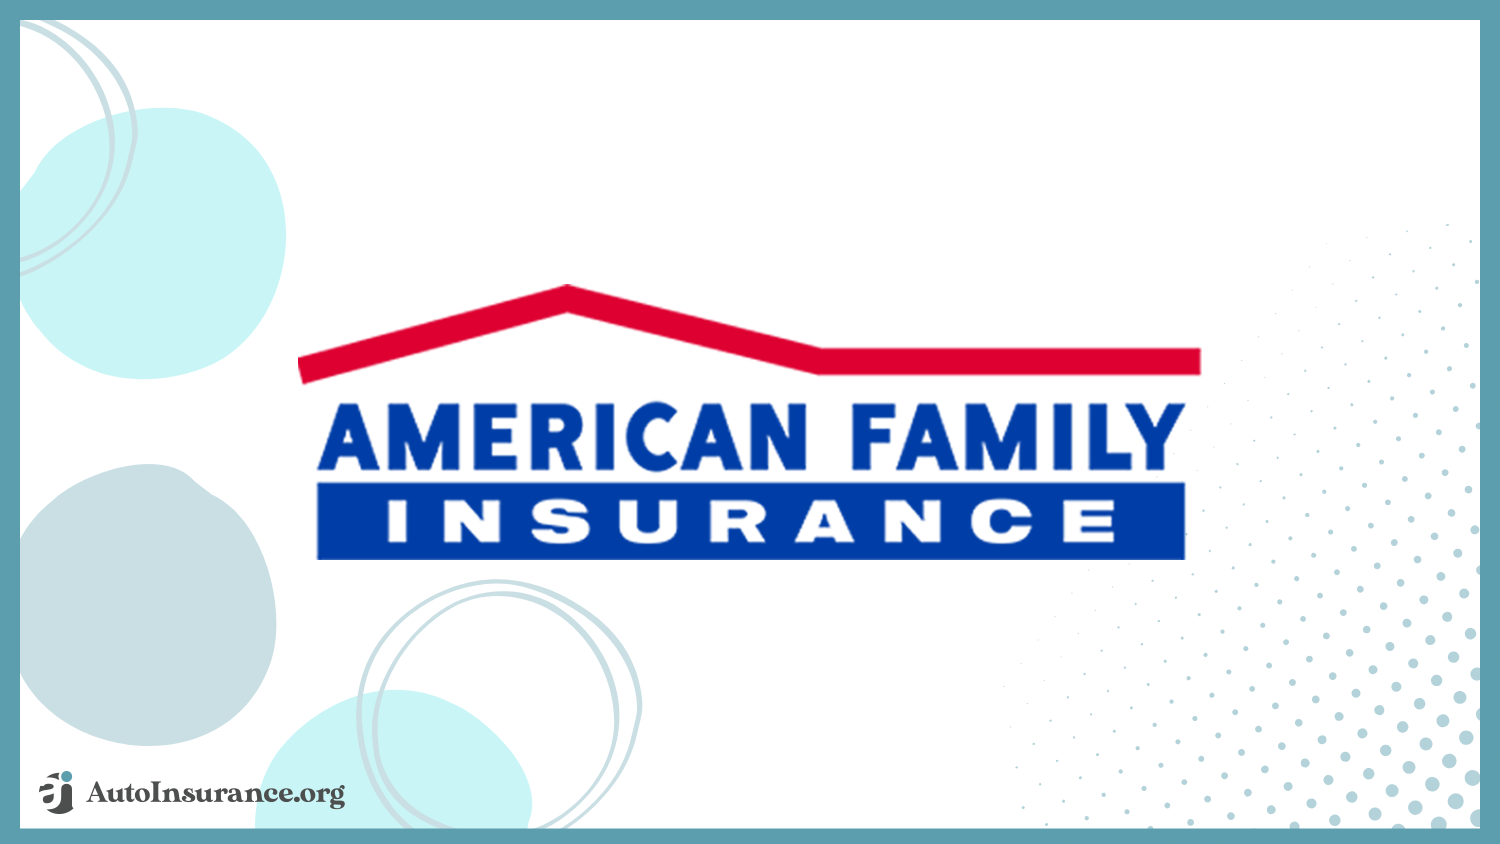 American Family best auto insurance companies that offer cash back for safe drivers